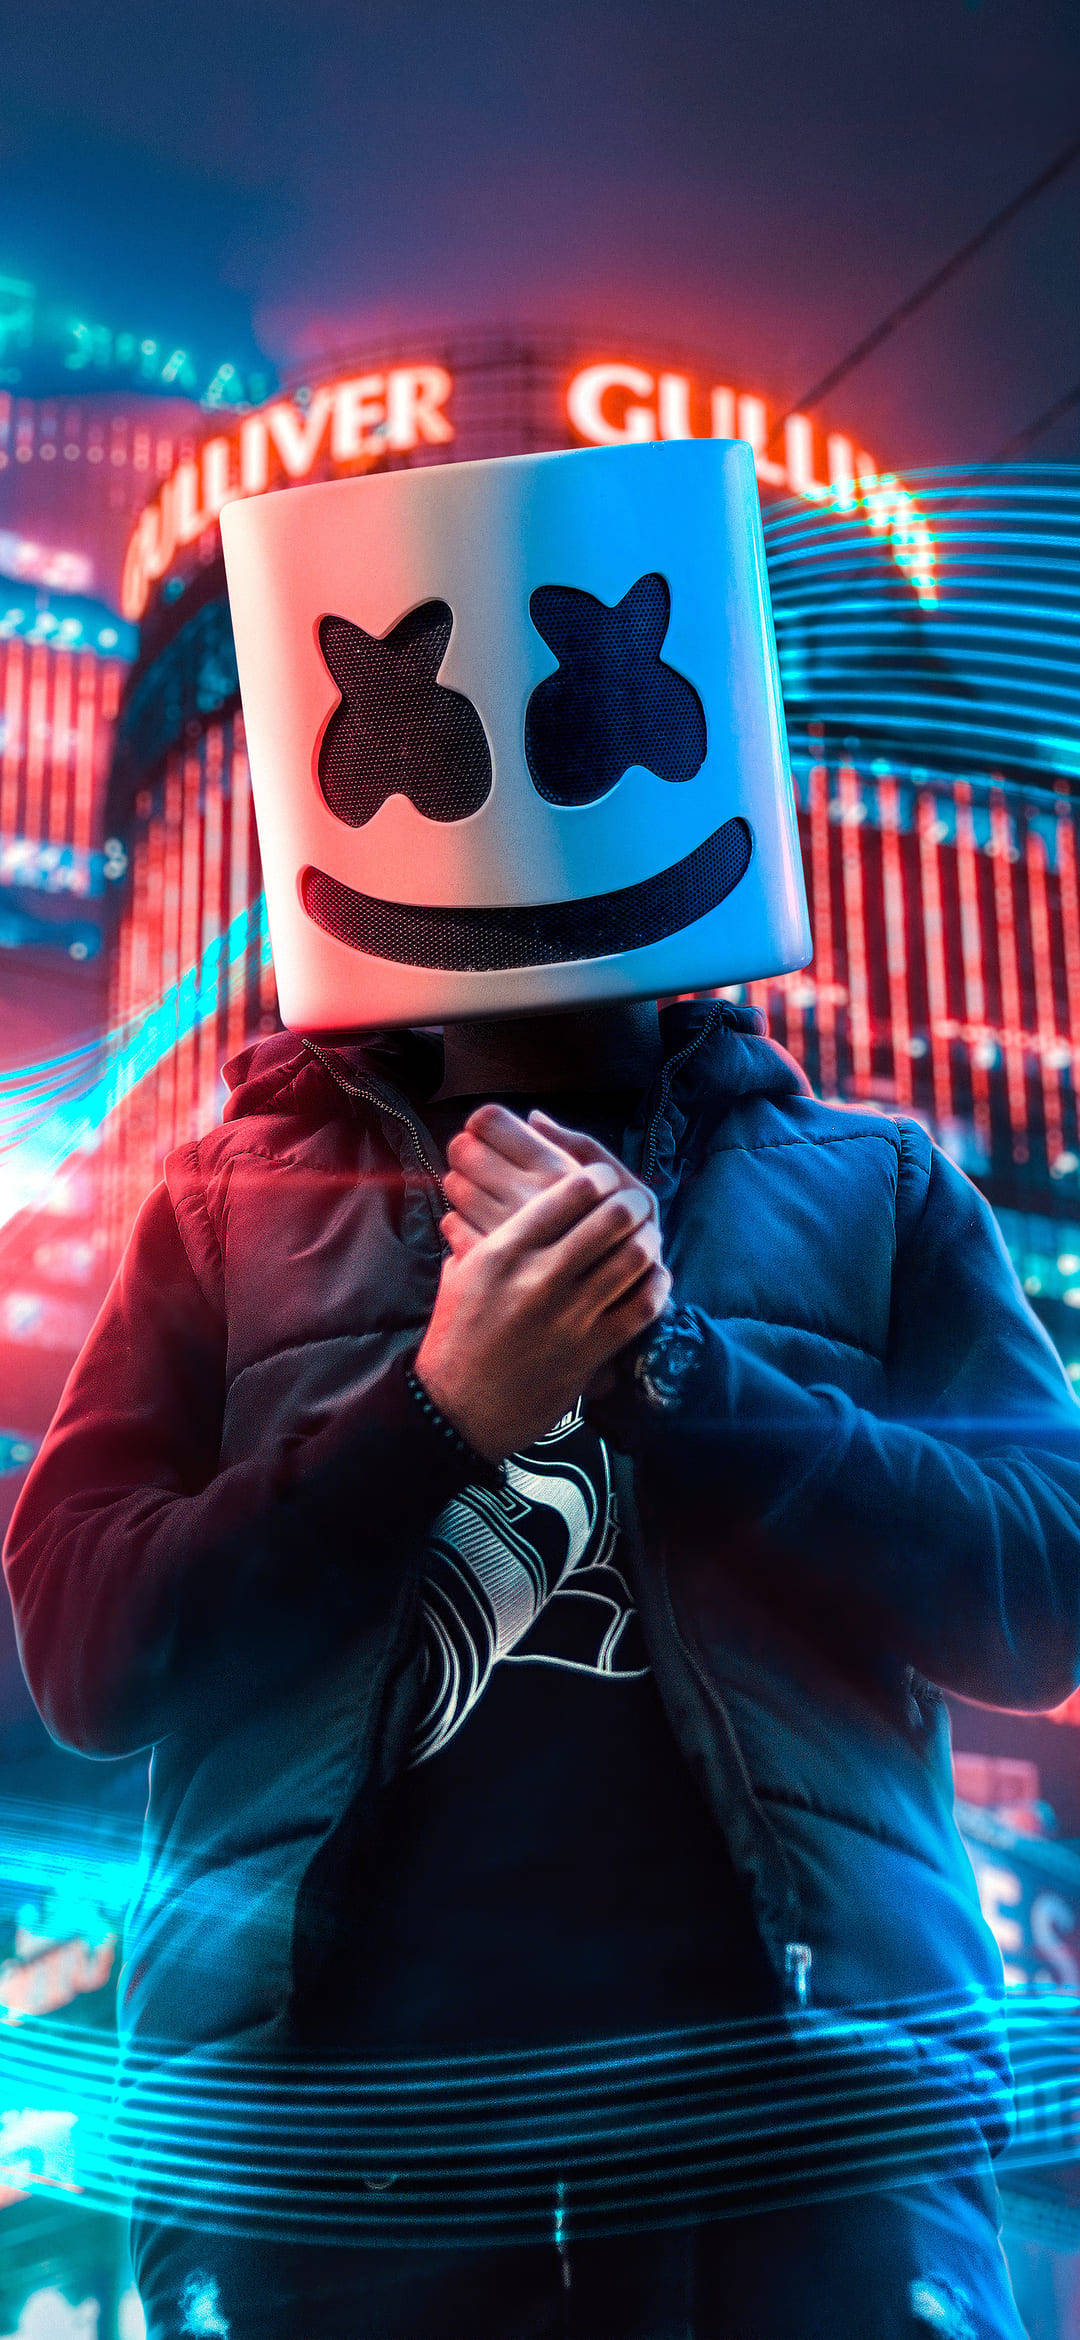 Download Neon Signs Background Marshmello Hd Iphone Wallpaper | Wallpapers .com